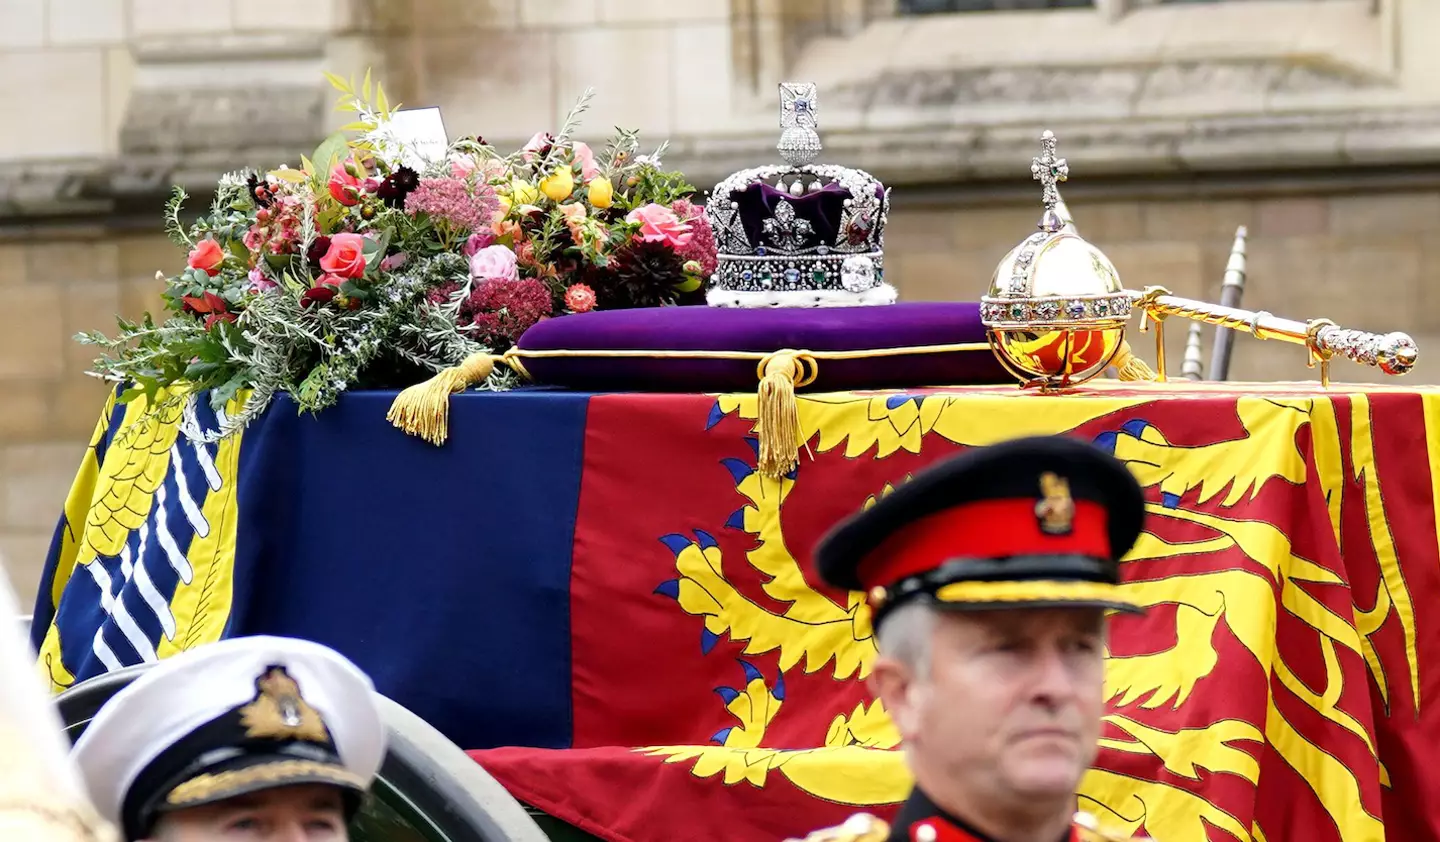 Queen Elizabeth's funeral is expected to be one of the most-watched royal events in history.